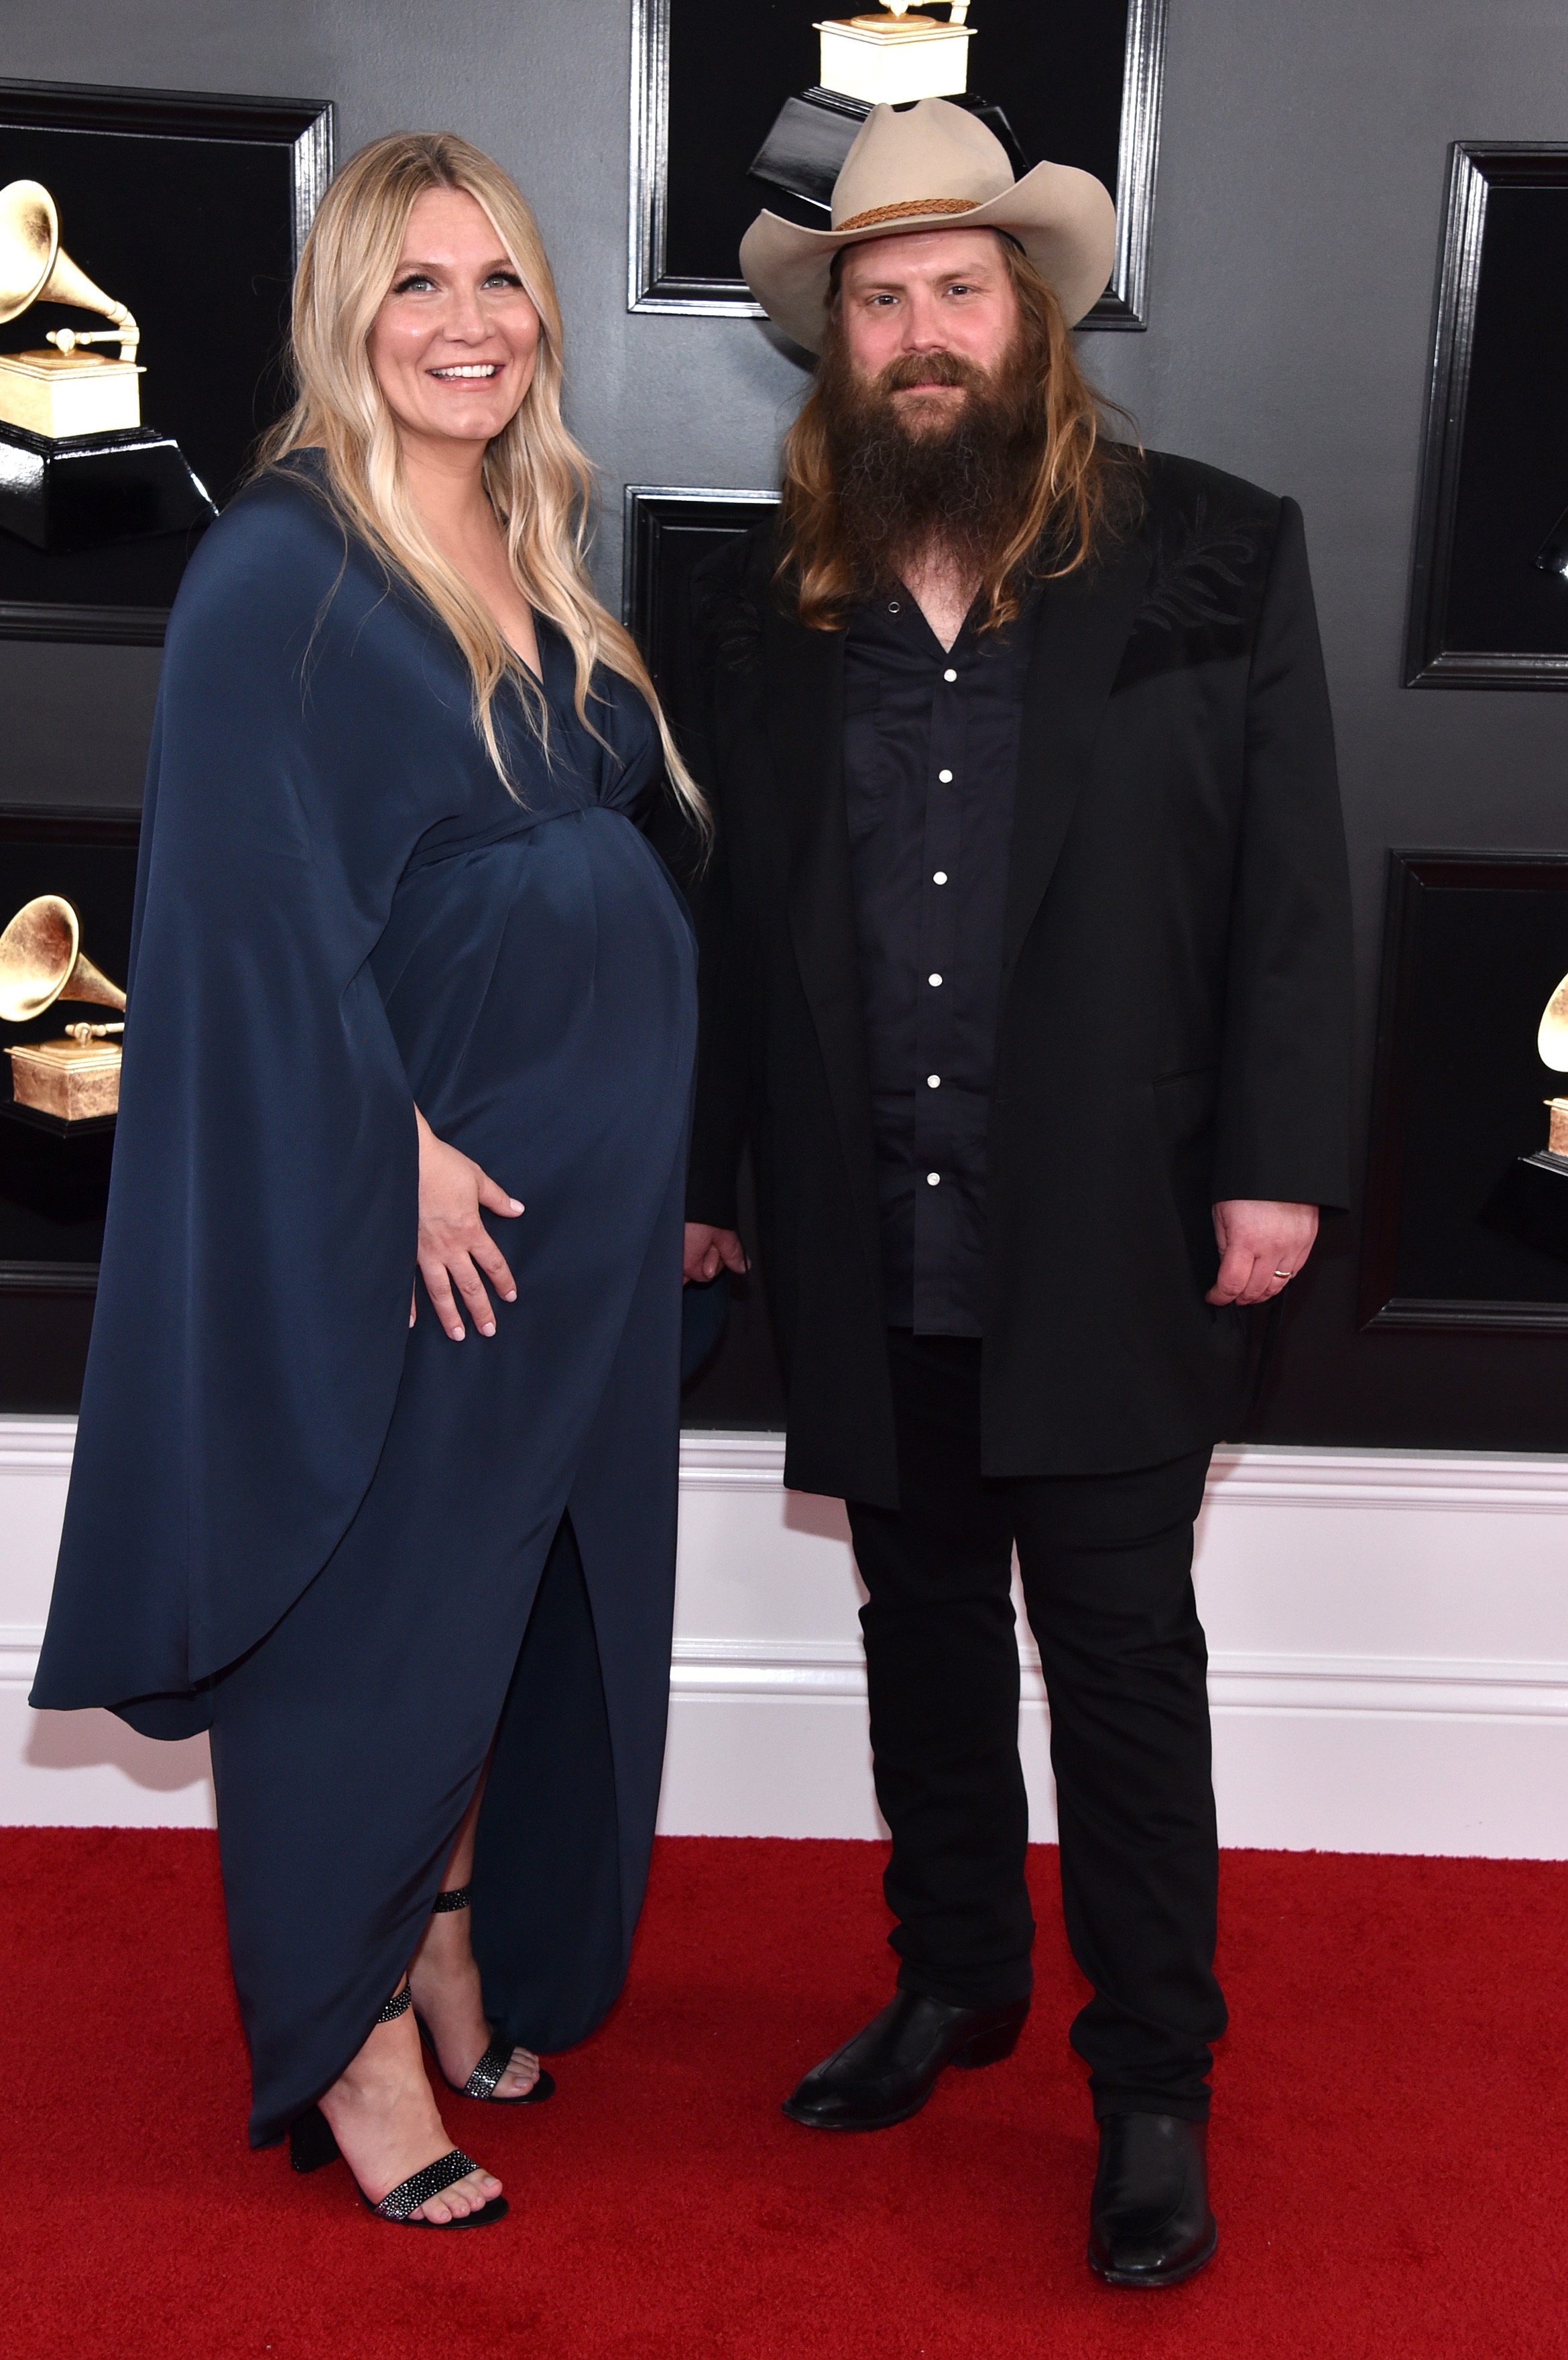 LOS ANGELES, CA - FEBRUARY 10: Morgane Stapleton (L) and Chris Stapleton attend the 61st Annual GRAMMY Awards at Staples Center on February 10, 2019 in Los Angeles, California. (Photo by John Shearer/Getty Images for The Recording Academy)